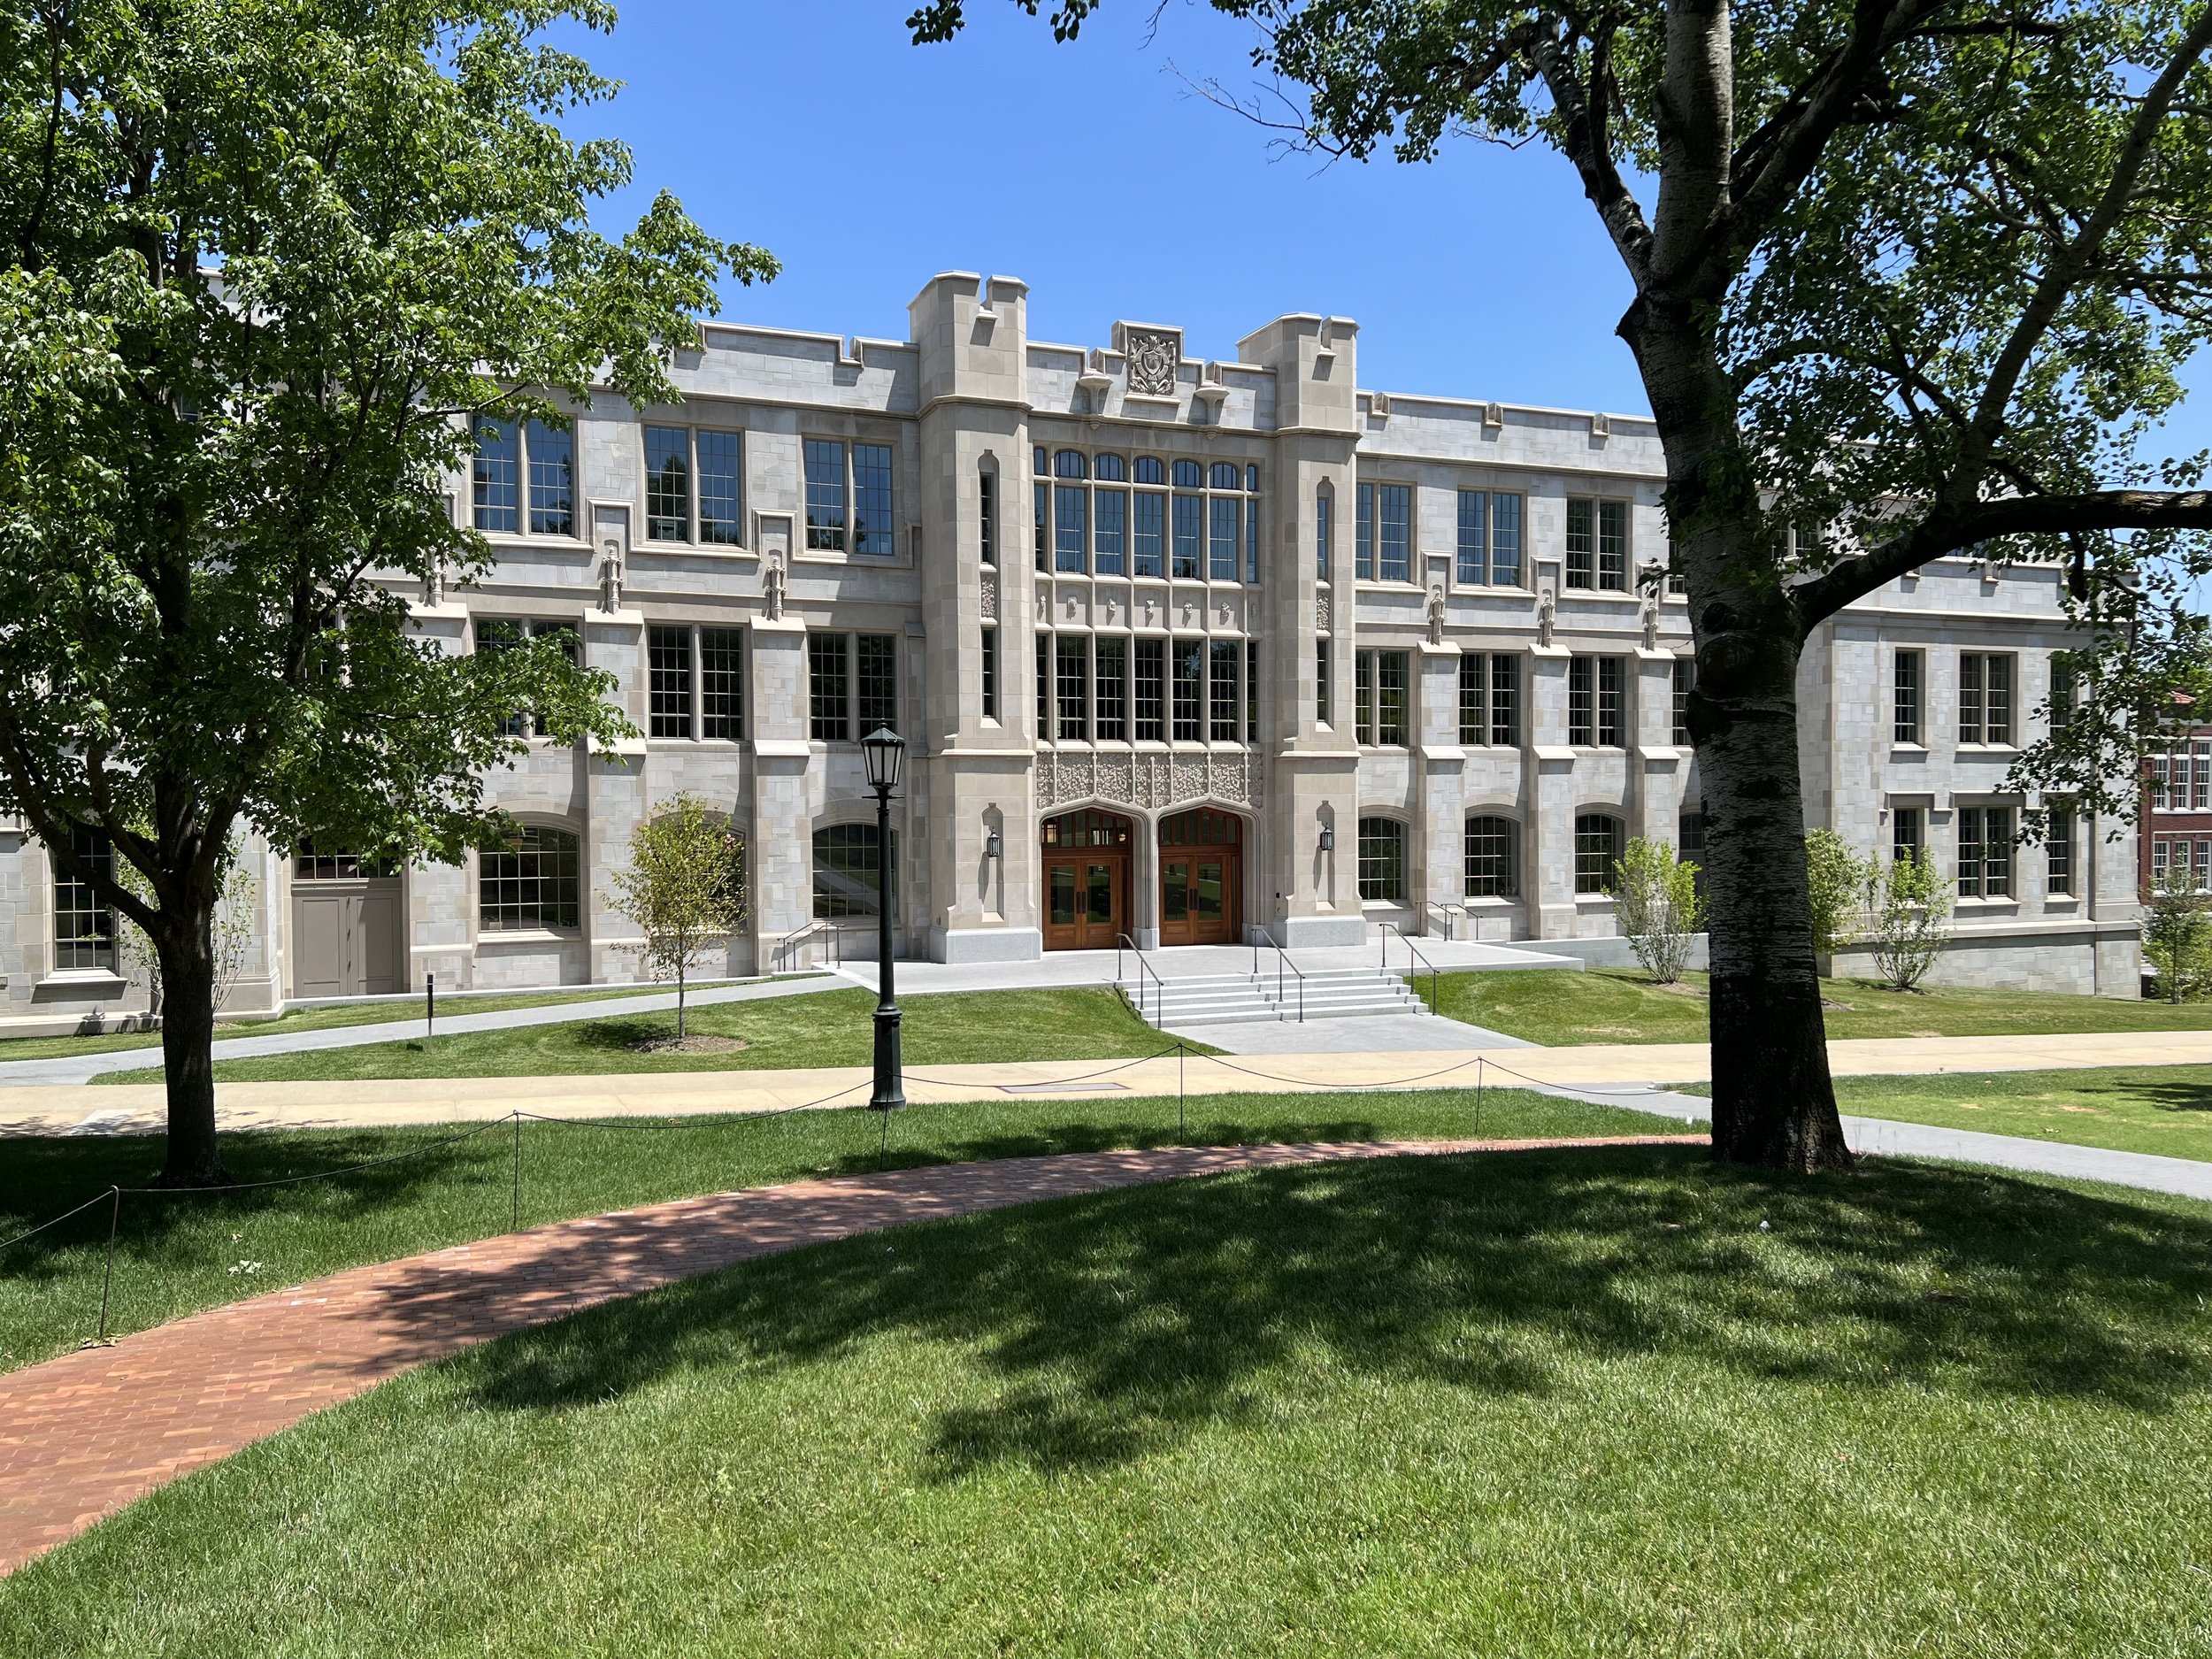 Student Success Center at the University of Arkansas — Ground Control